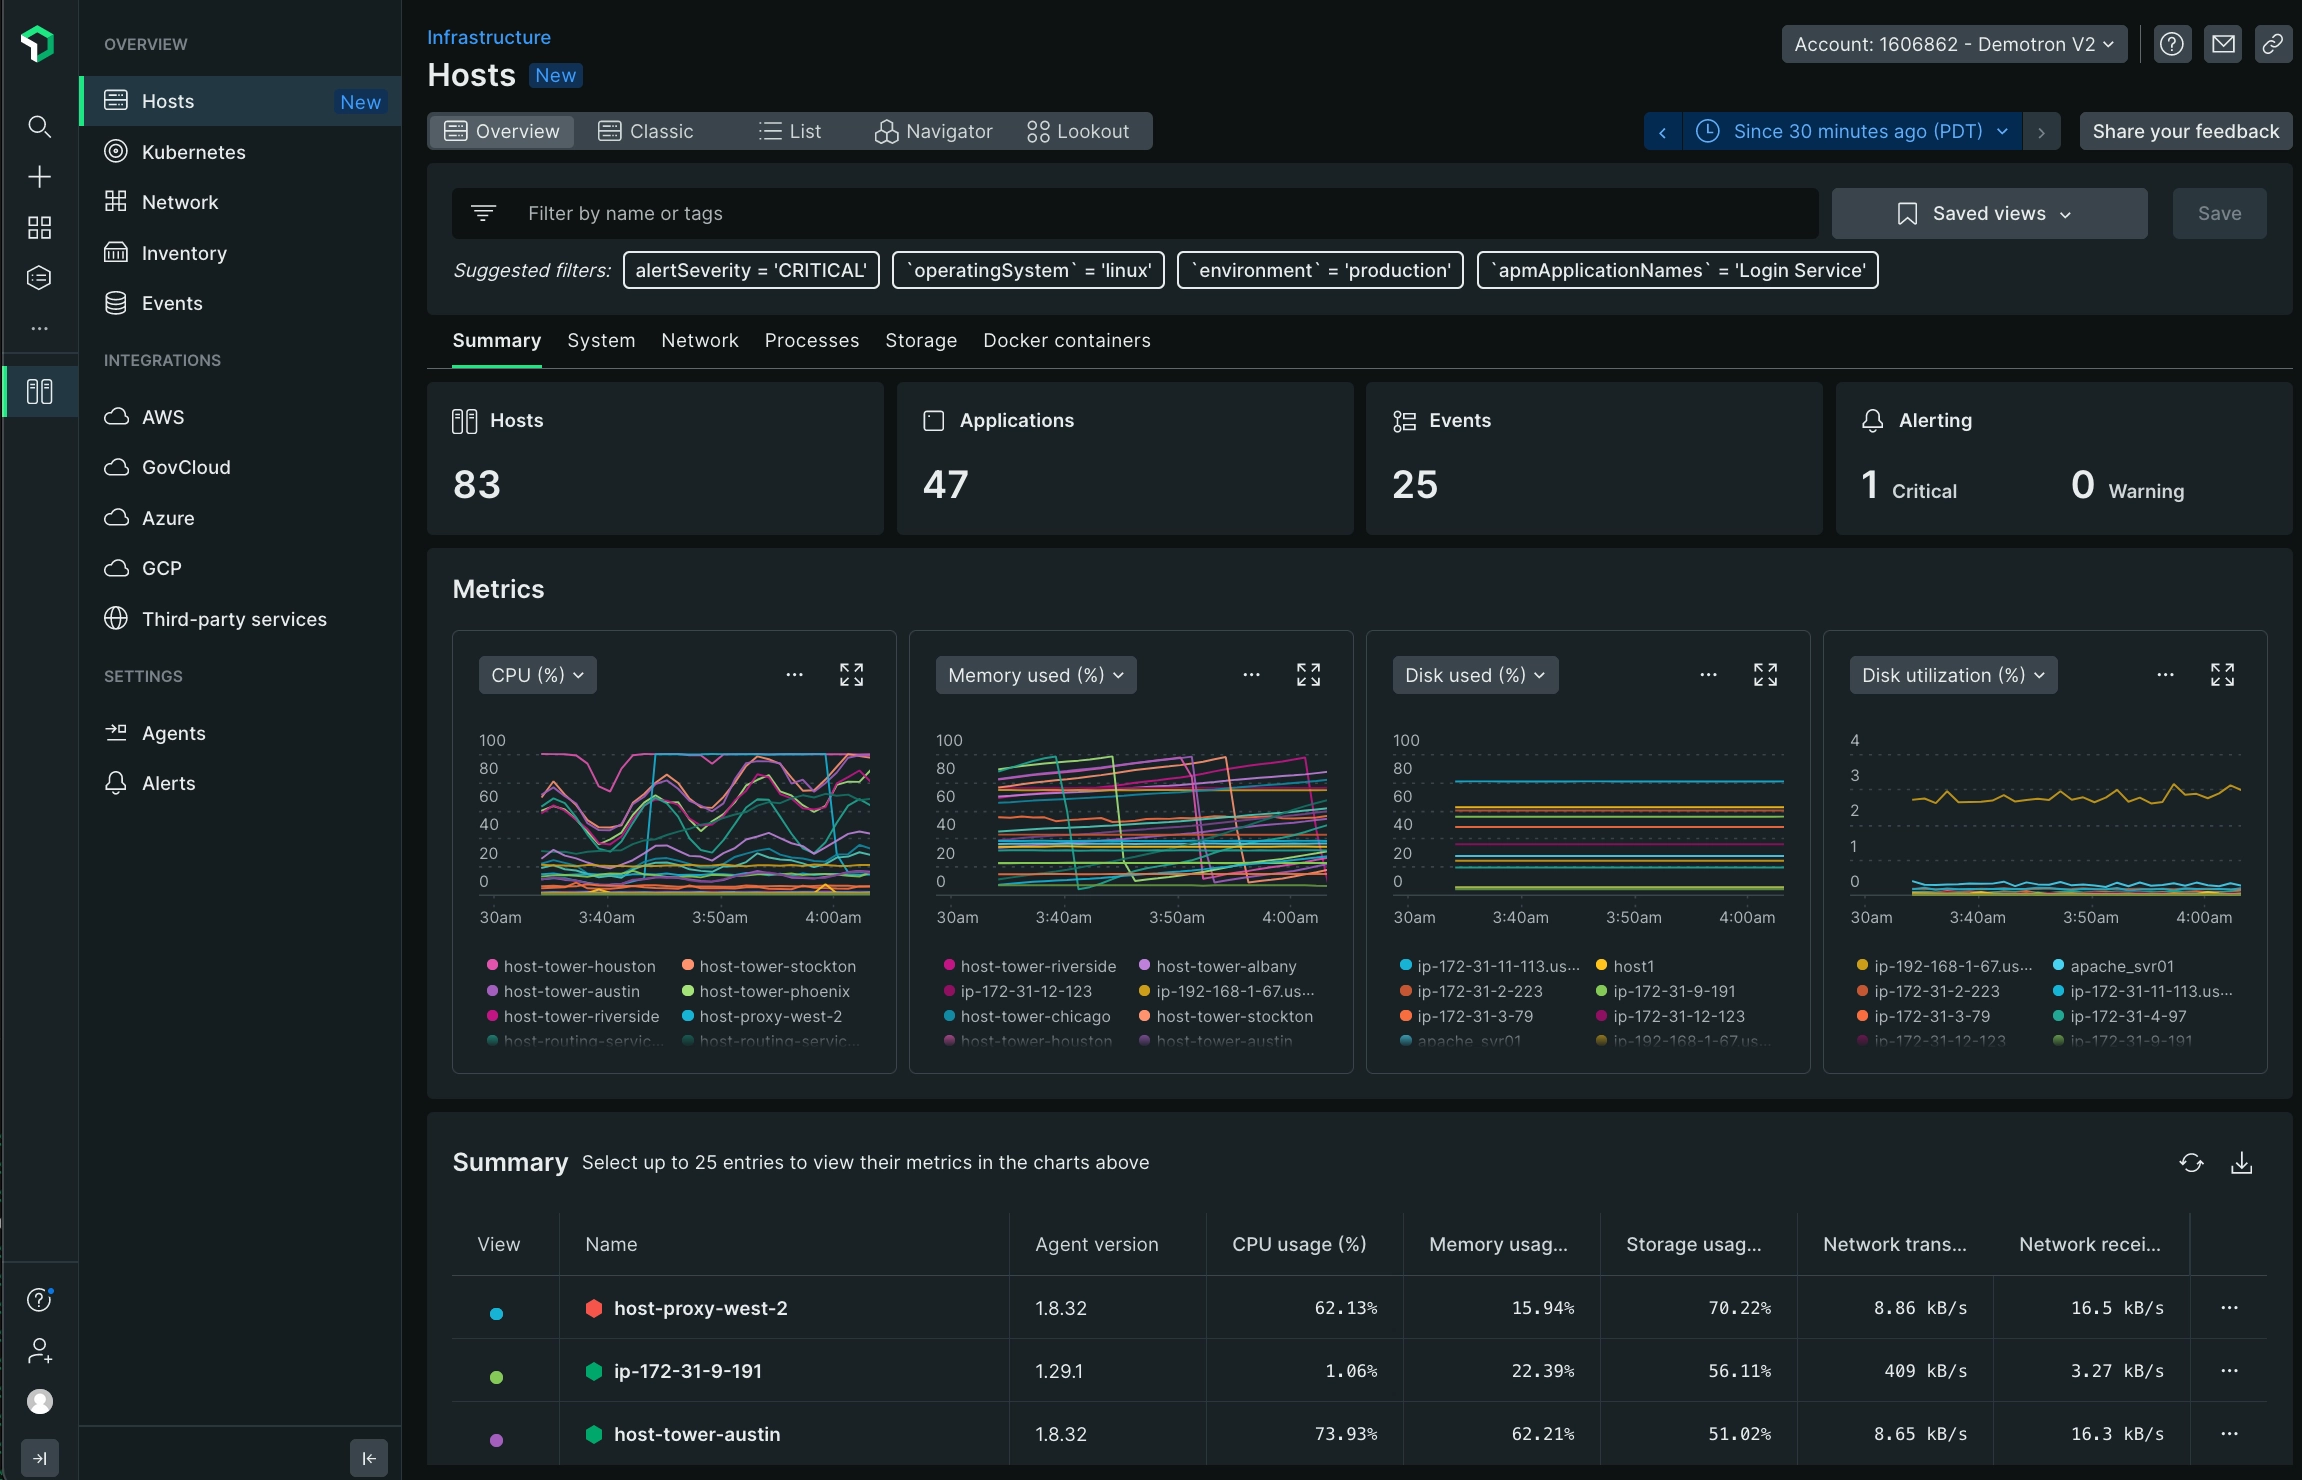 A screenshot showing the New Relic infrastructure monitoring UI.